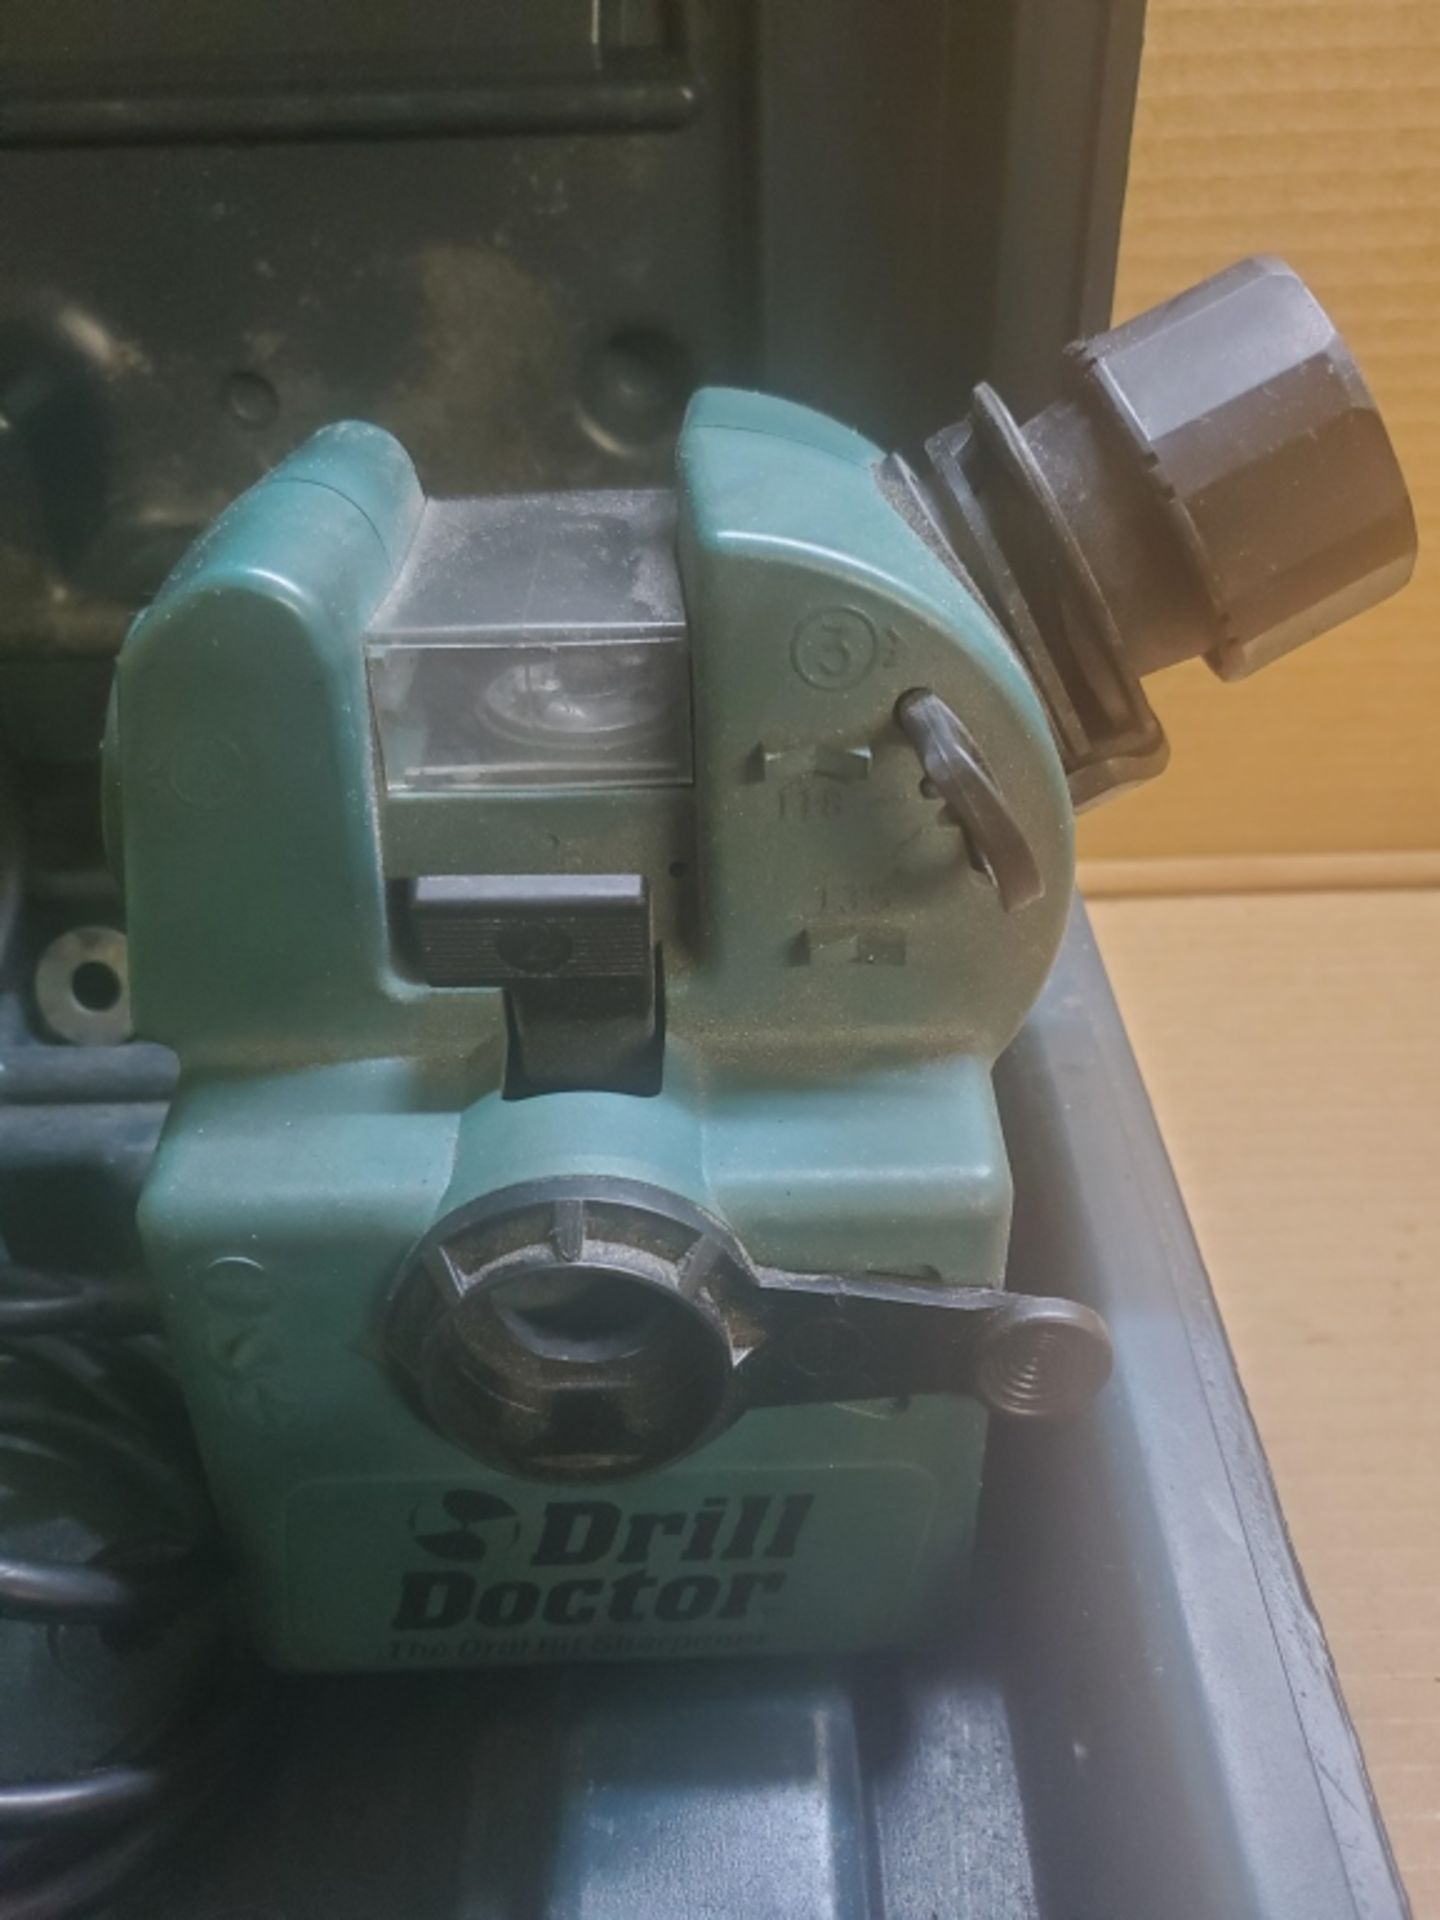 Drill Doctor Model 750 Drill Bit Sharpener With Case and Manual - Image 4 of 6